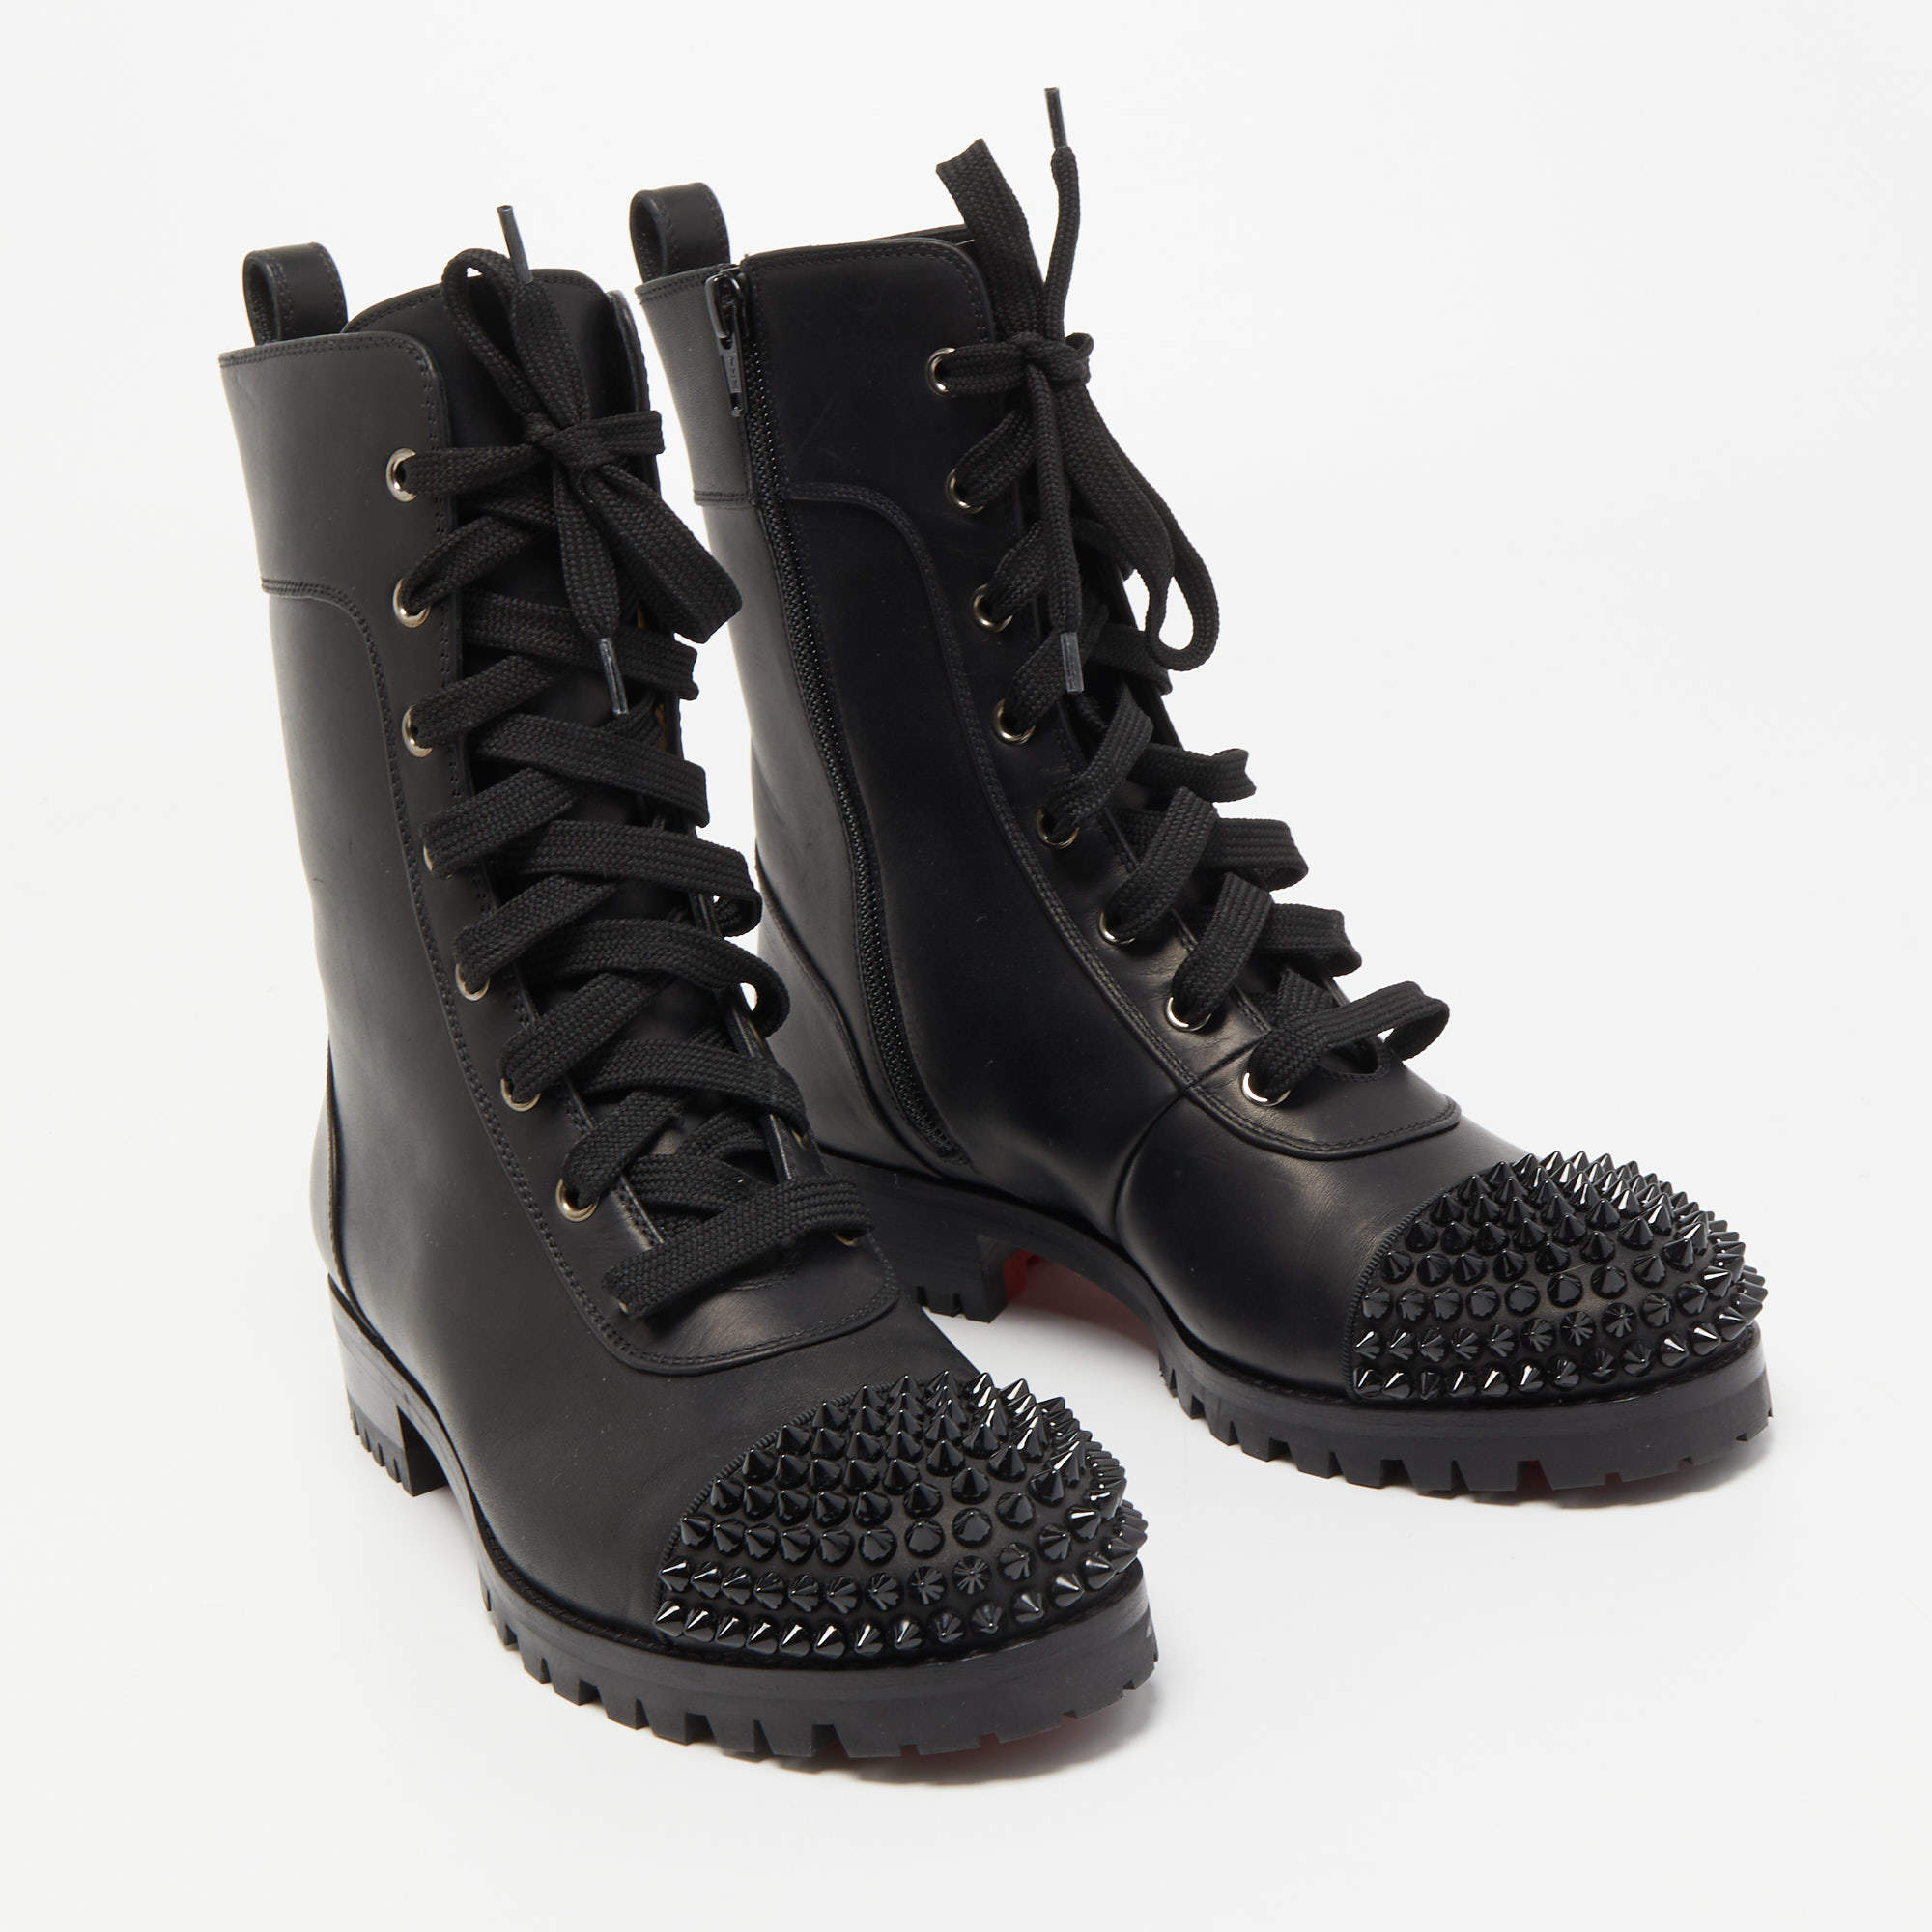 Christian Louboutin Authenticated TS Croc Ankle Boots